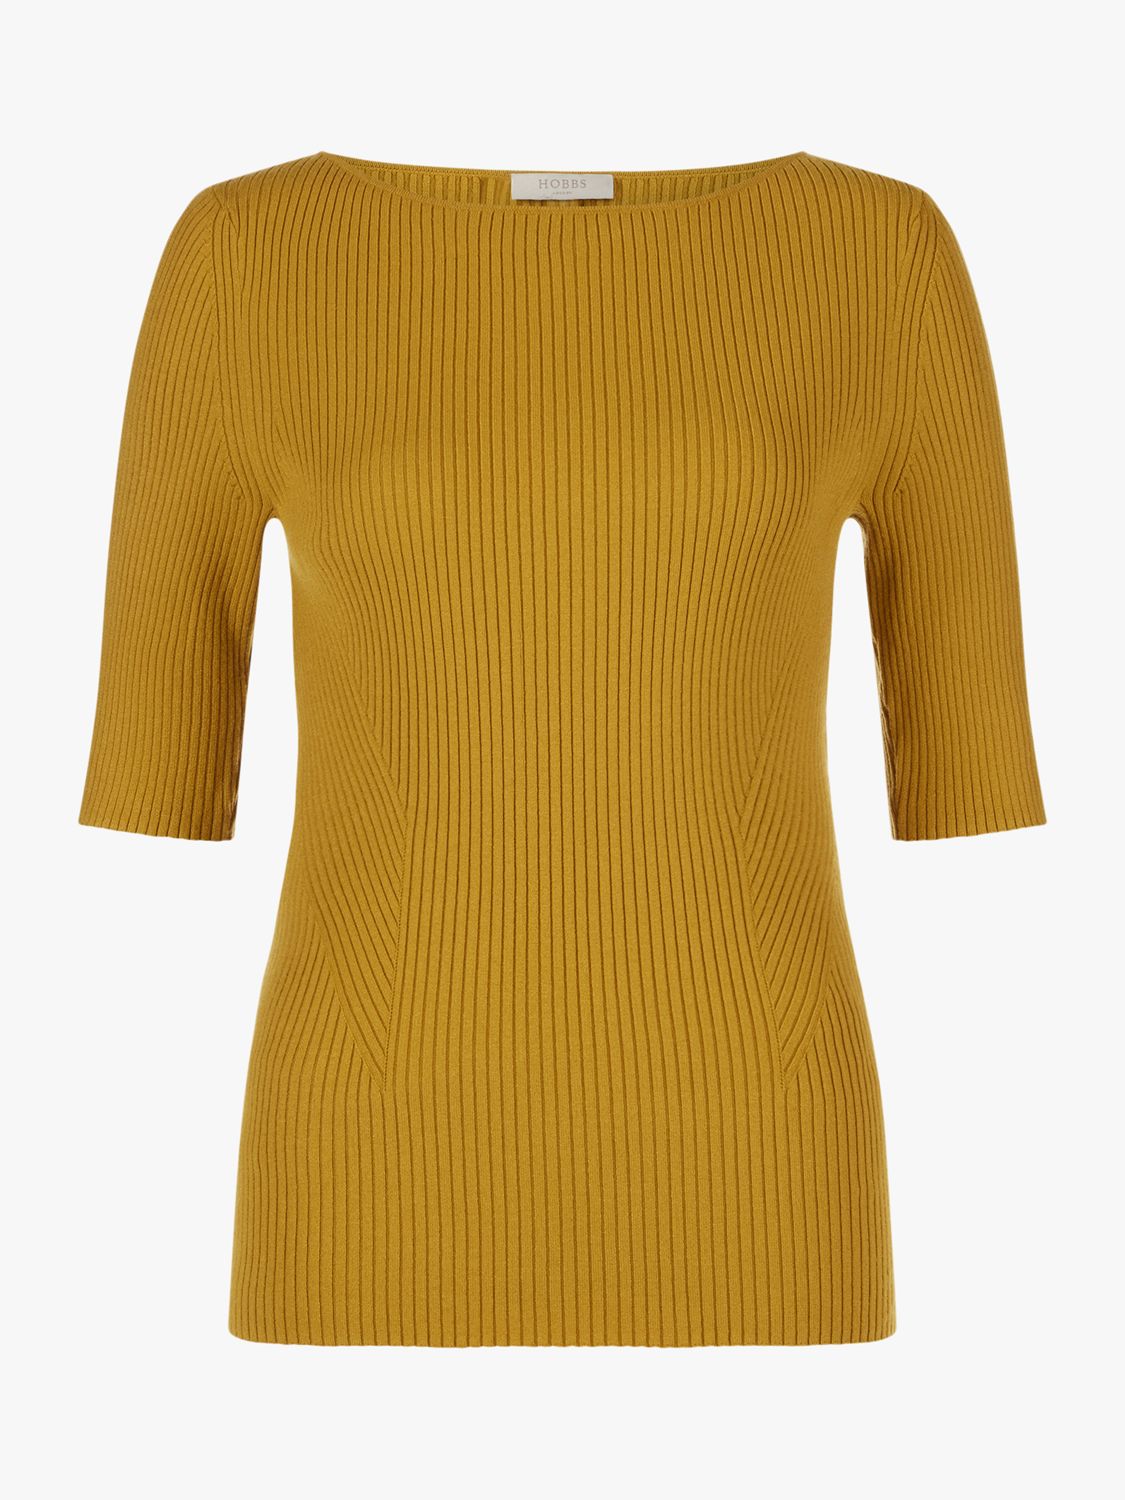 Hobbs Florence Knitted Sweatshirt, Chartreuse